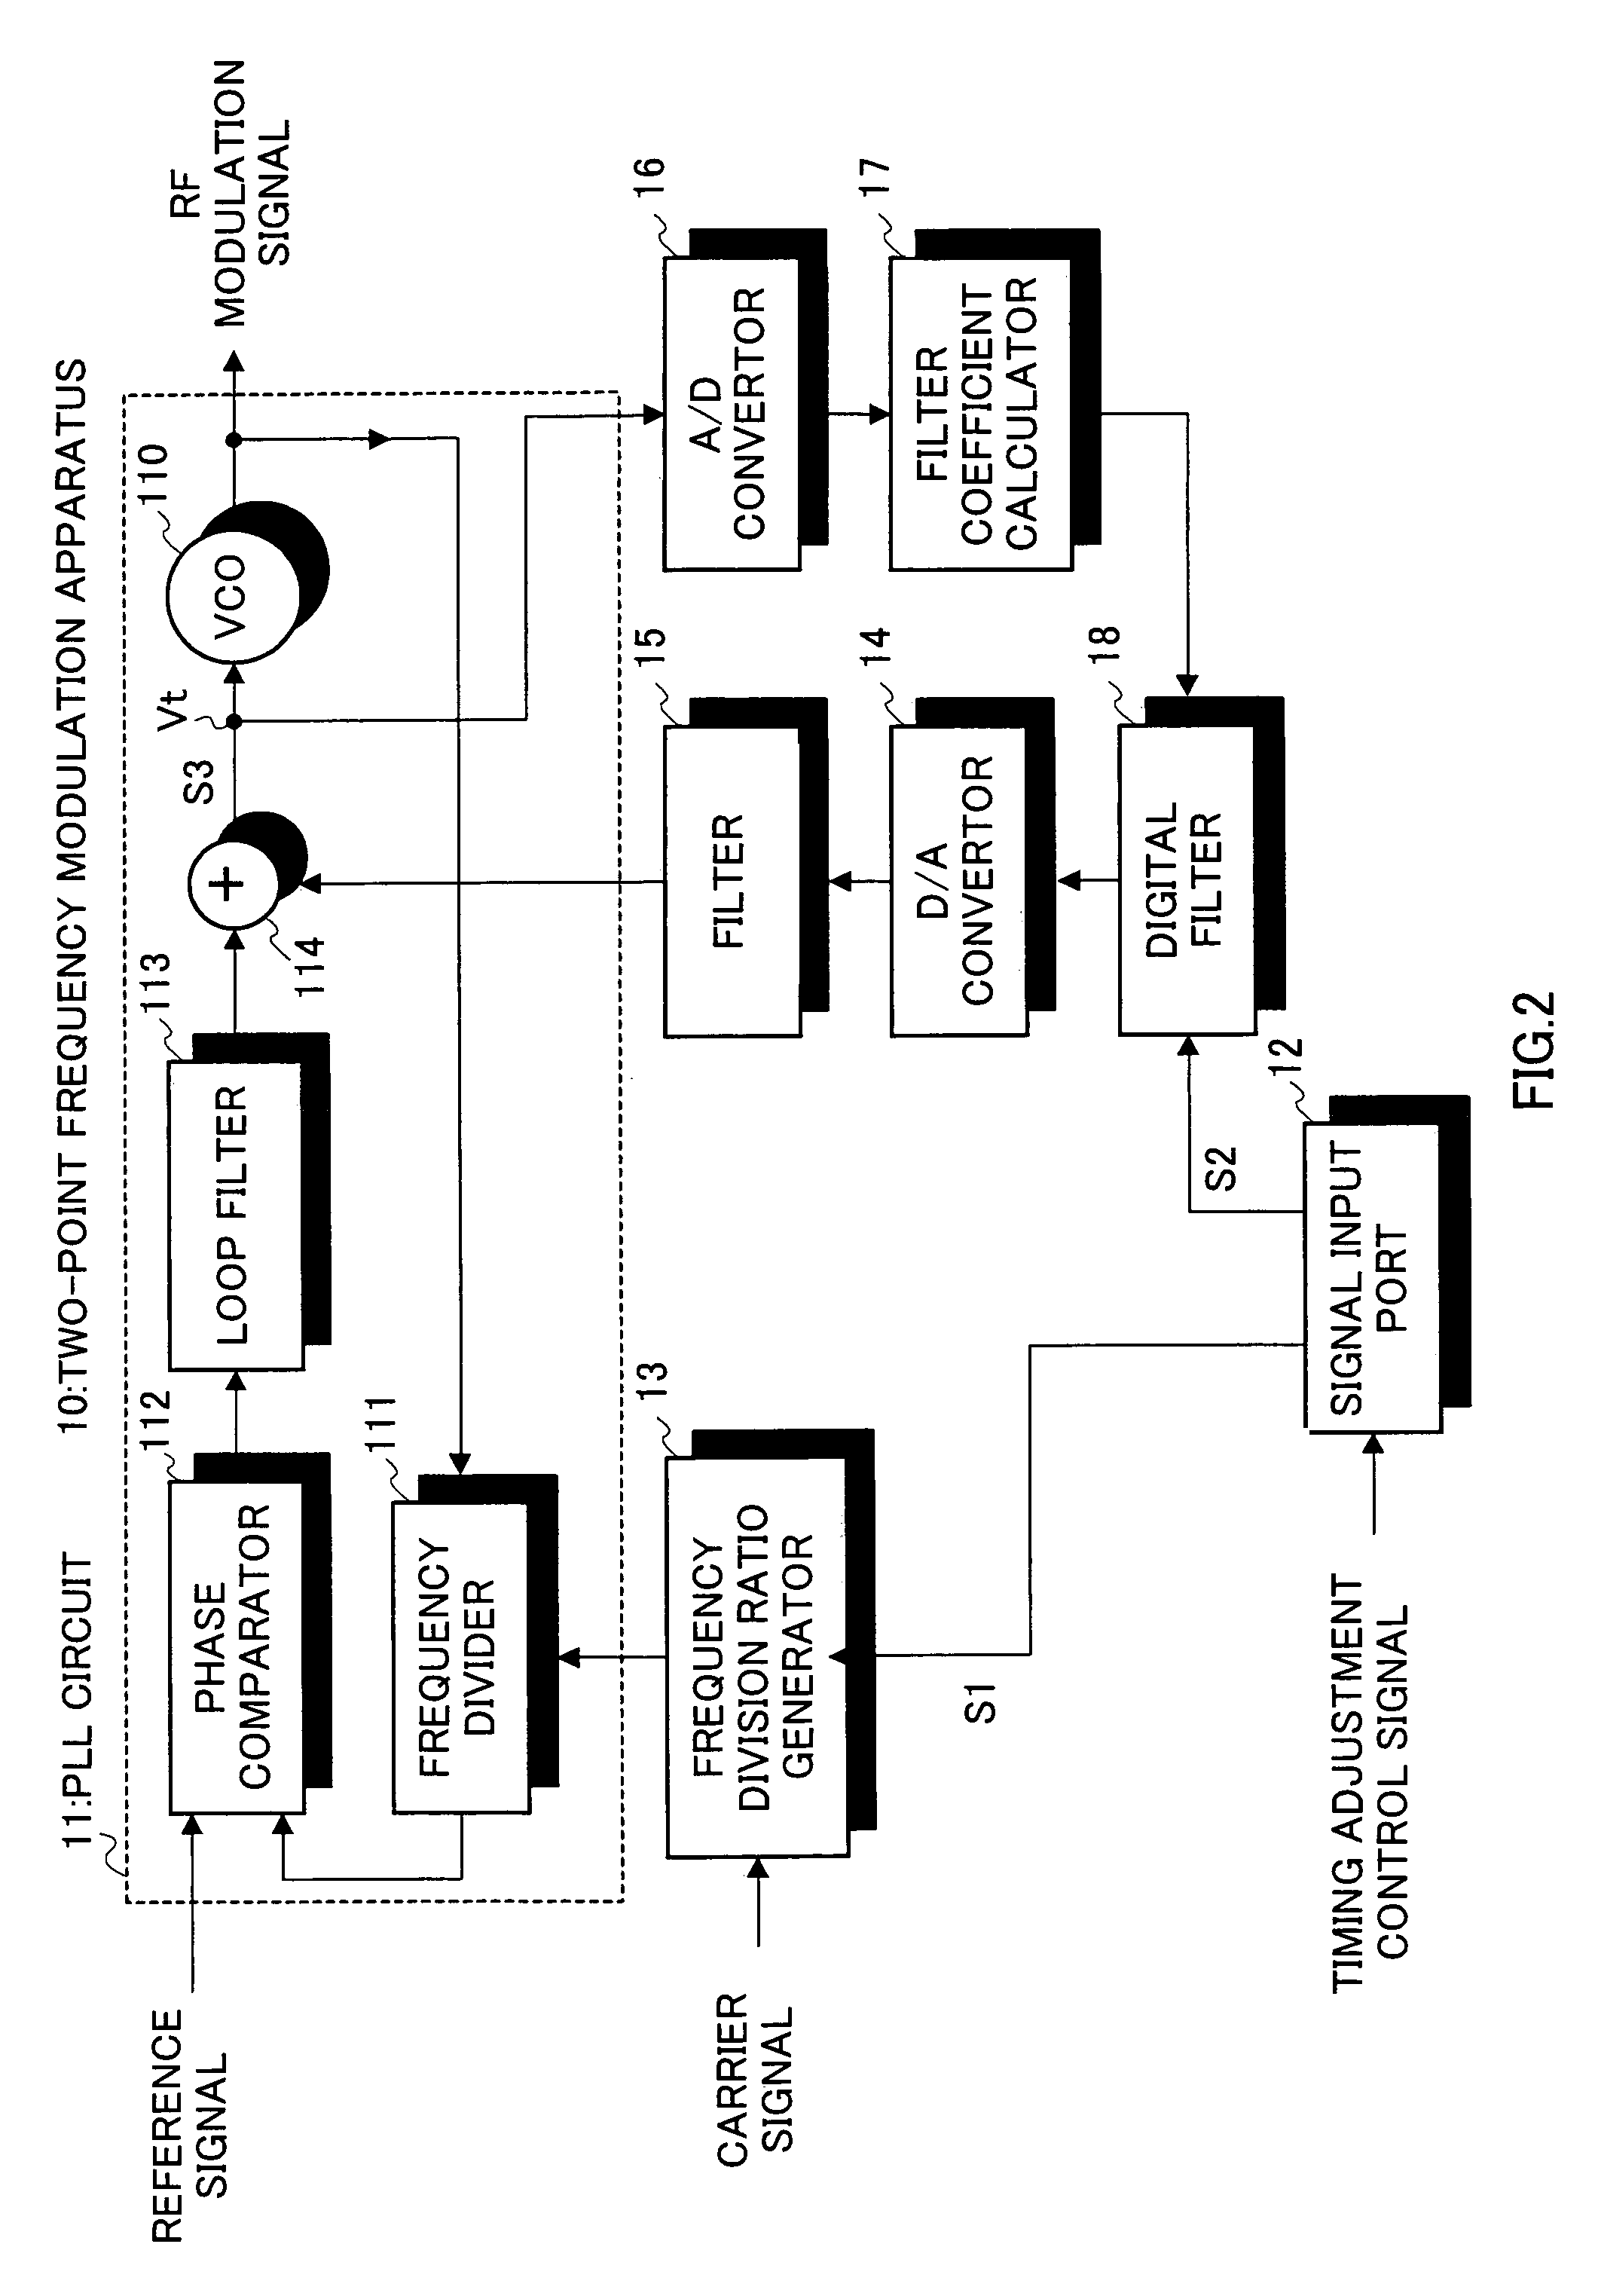 Two-point frequency modulation apparatus, wireless transmitting apparatus, and wireless receiving apparatus